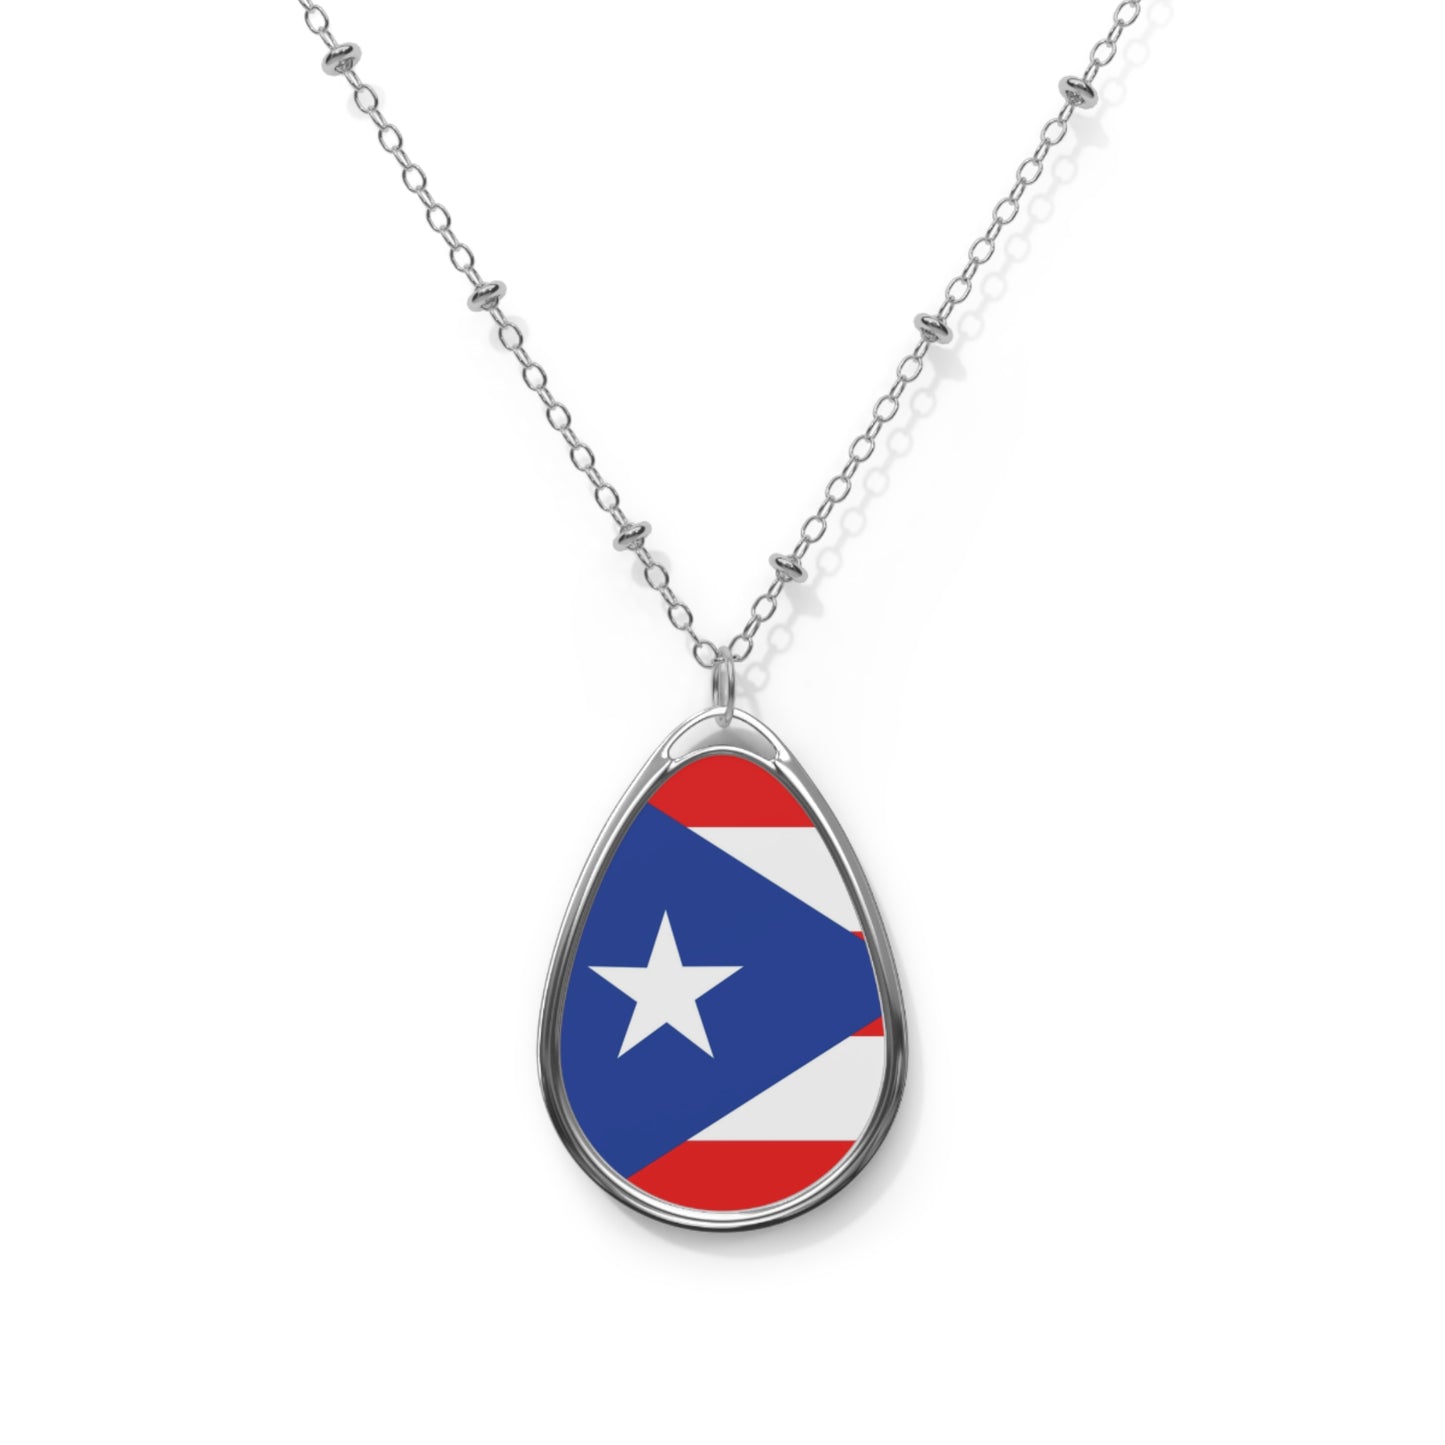 Puerto Rico Flag Necklace / Patriotic Jewelry For Puerto Rico Lovers